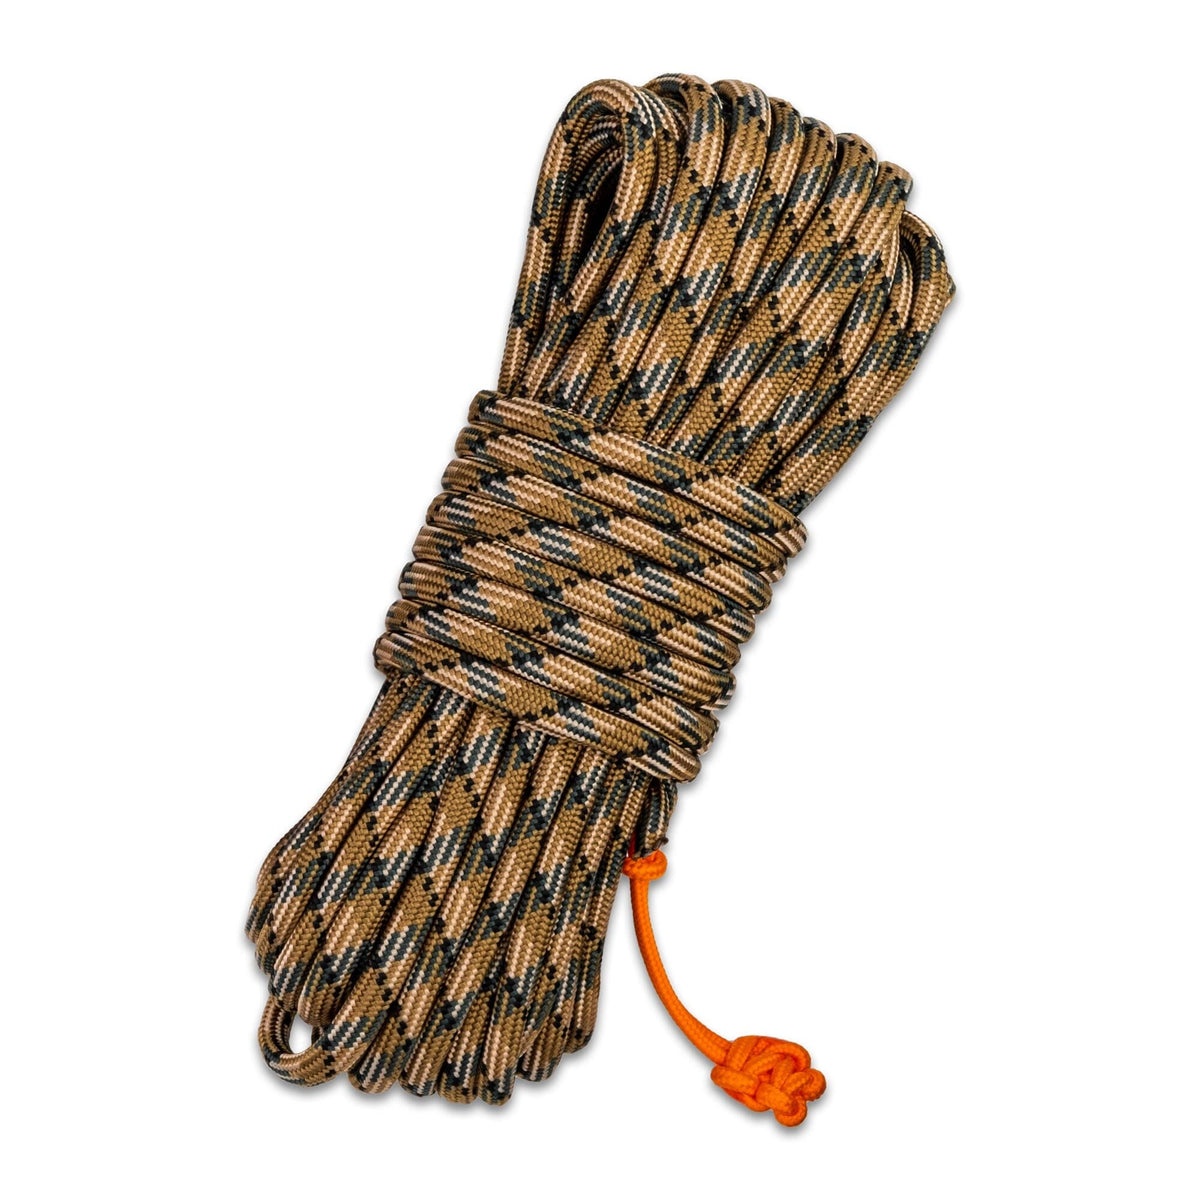 SurvivorCord 25 FT QD SurvivorCord SurvivorCord 25 FT Quick-Deploy FOREST-CAMO 